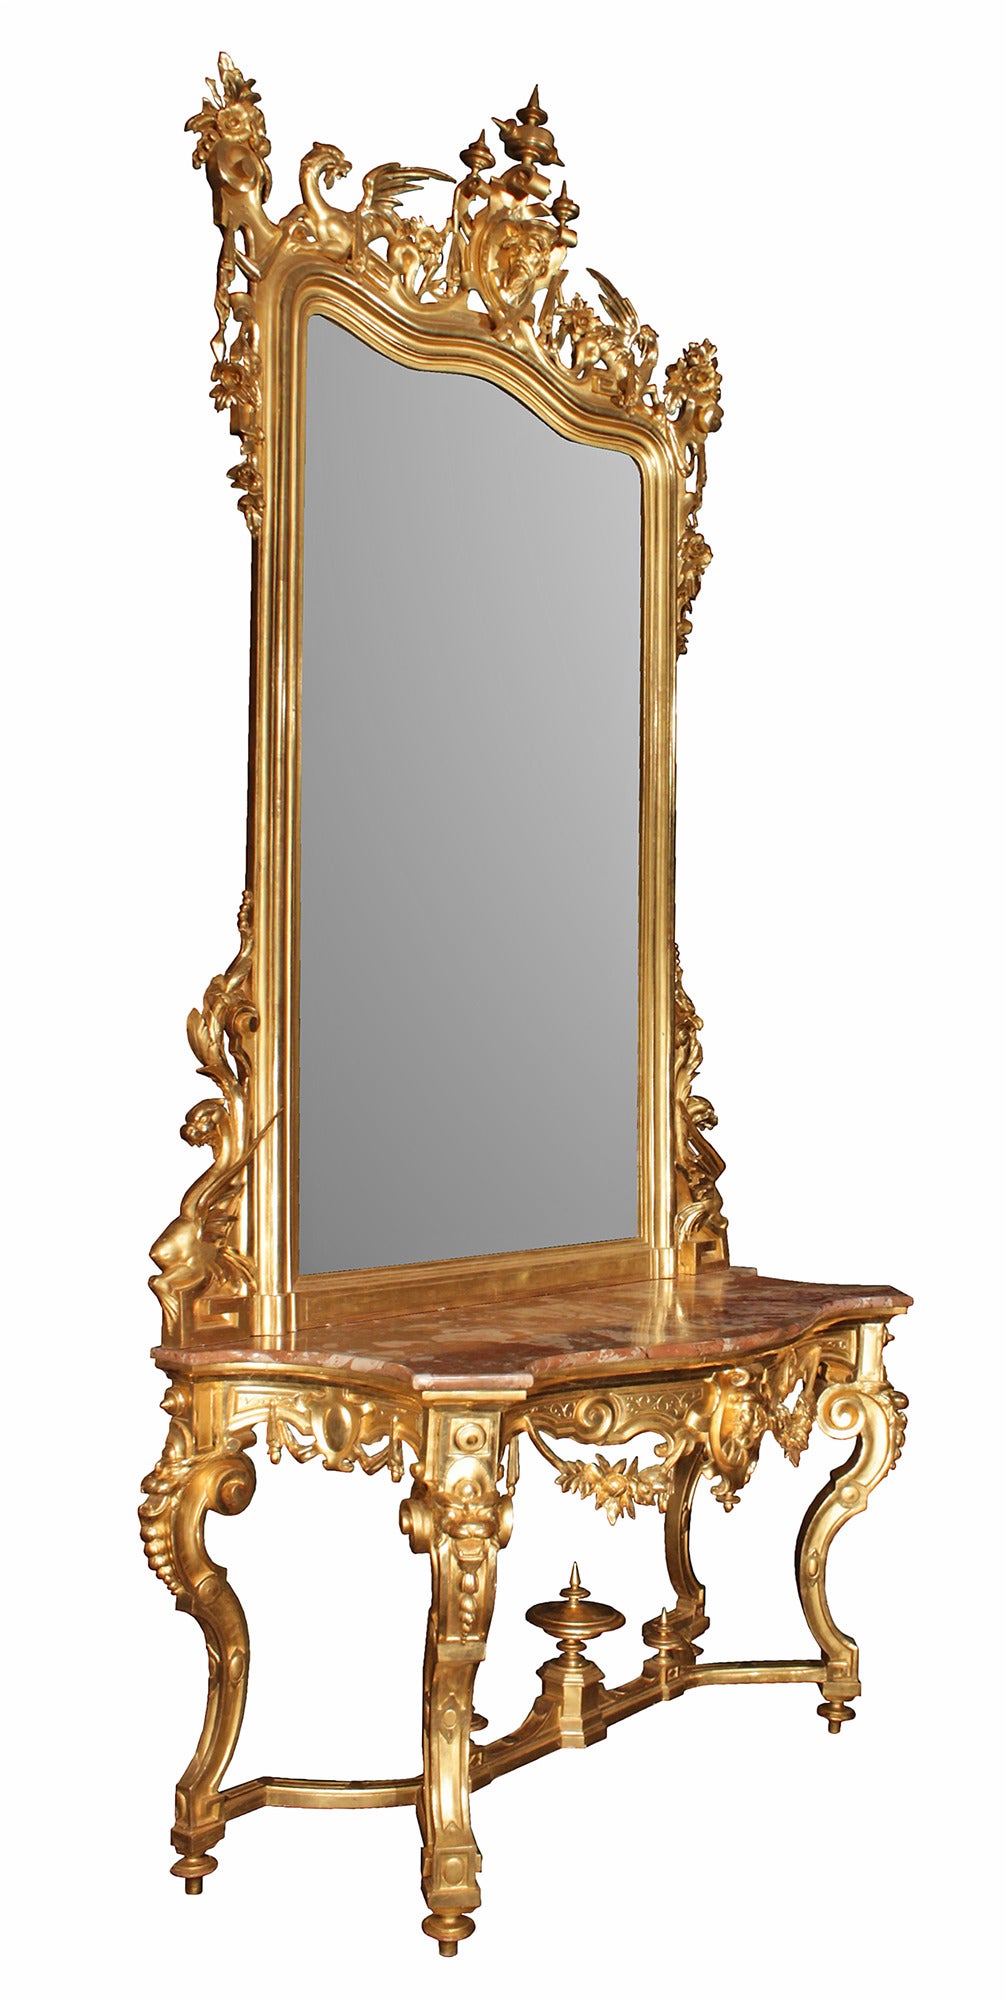 A spectacular and large-scale true pair of Italian 19th century Louis XV St. giltwood consoles with marble tops and matching mirrors. Each console is raised on toupie feet below handsome cabriole legs in a satin and burnished finish with cabochons